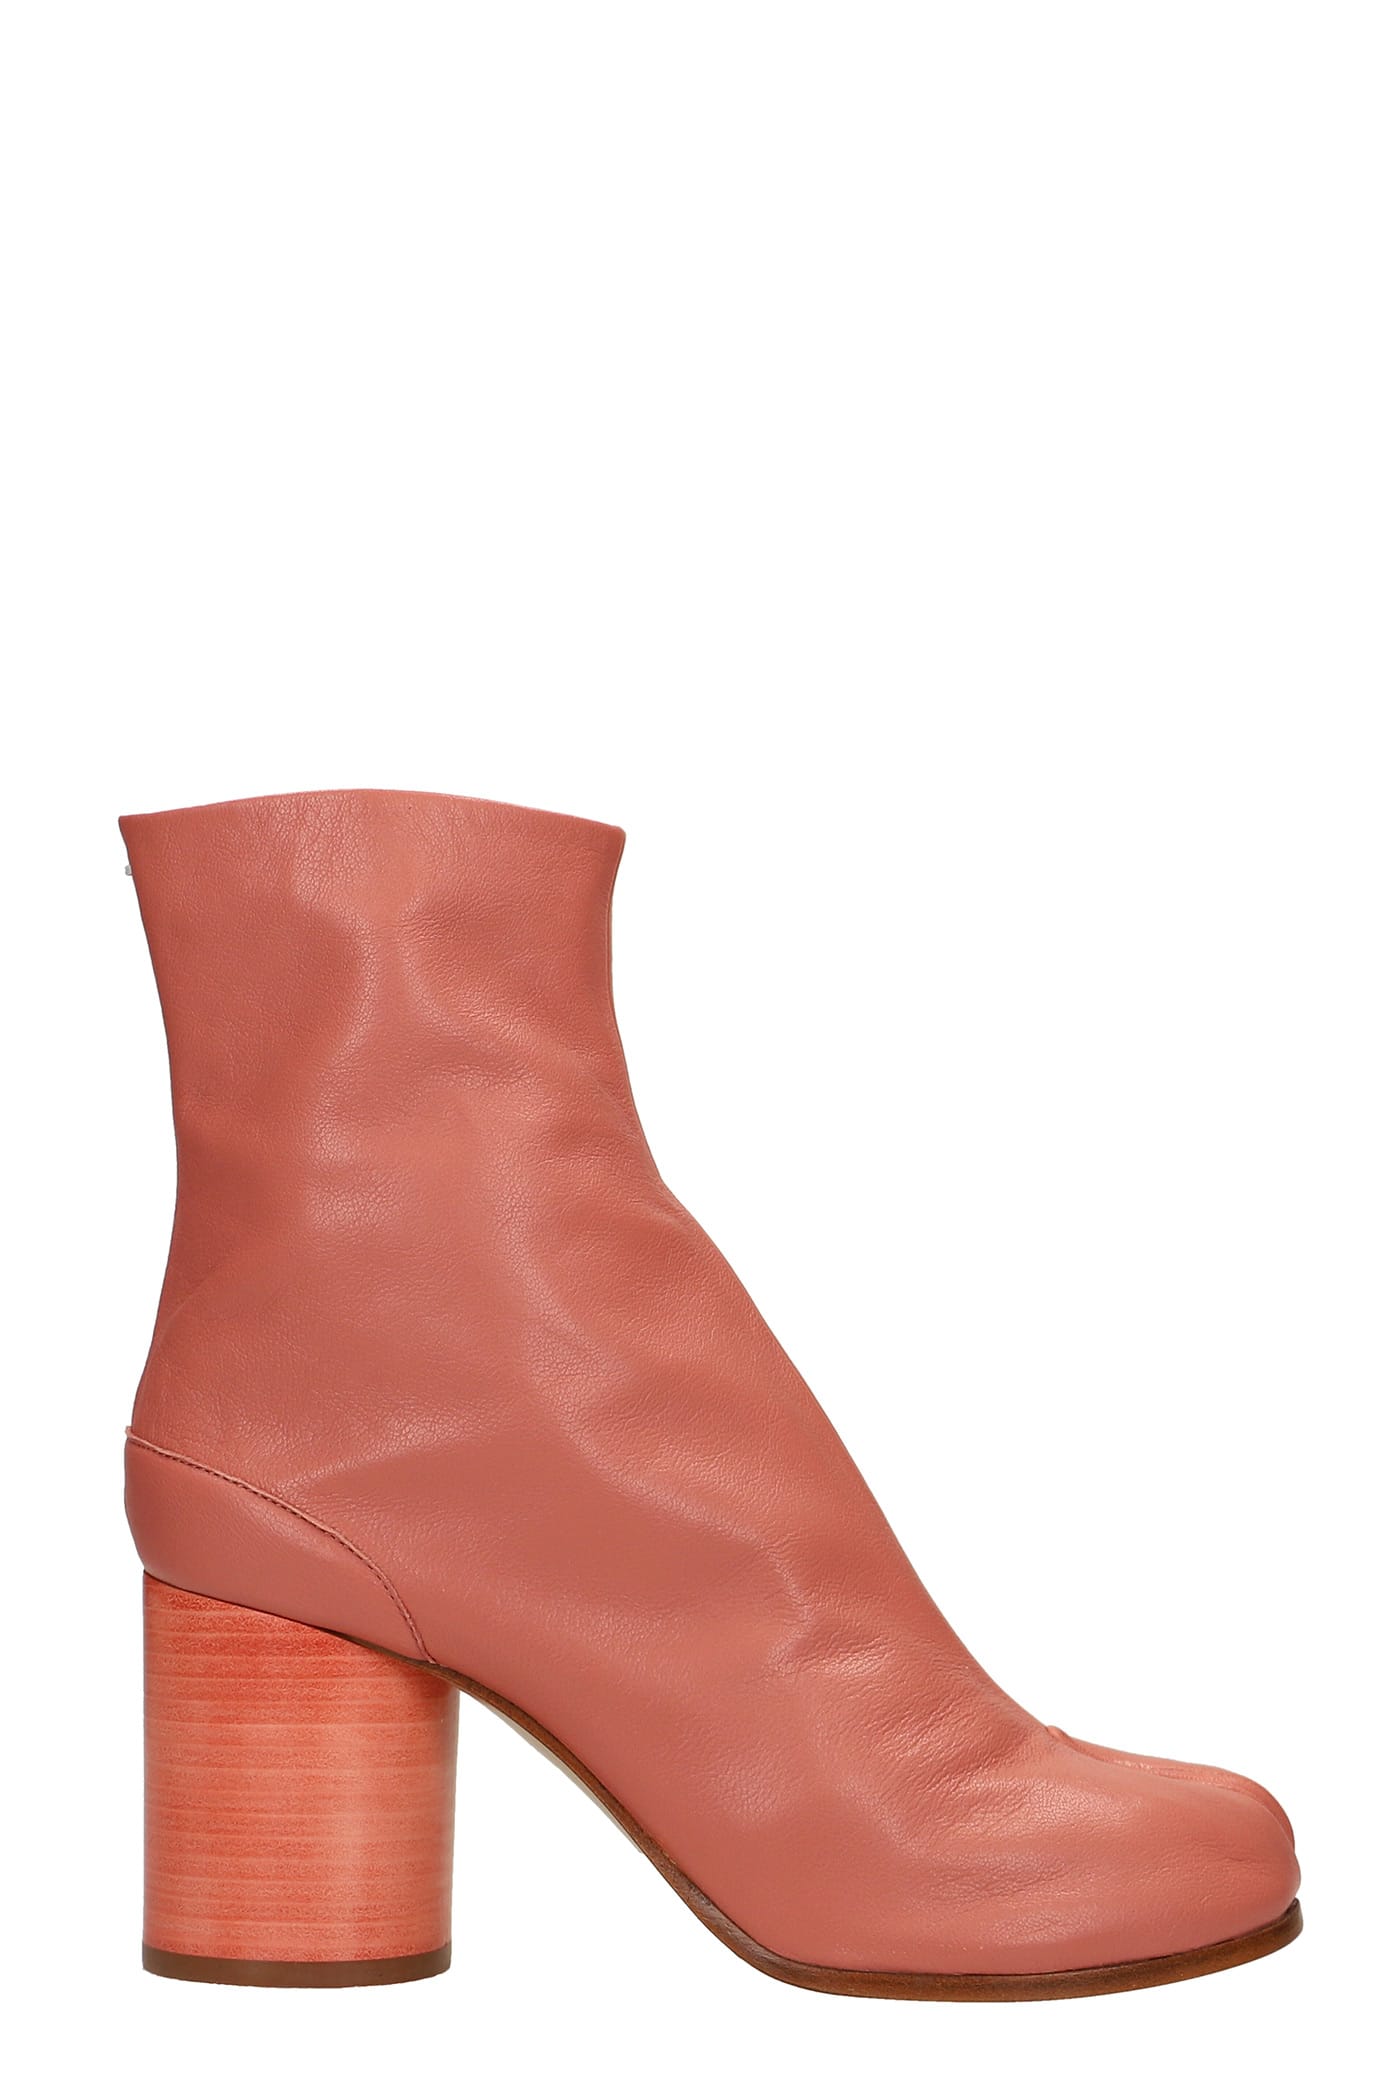 Maison Margiela High Heels Ankle Boots In Rose-pink Leather